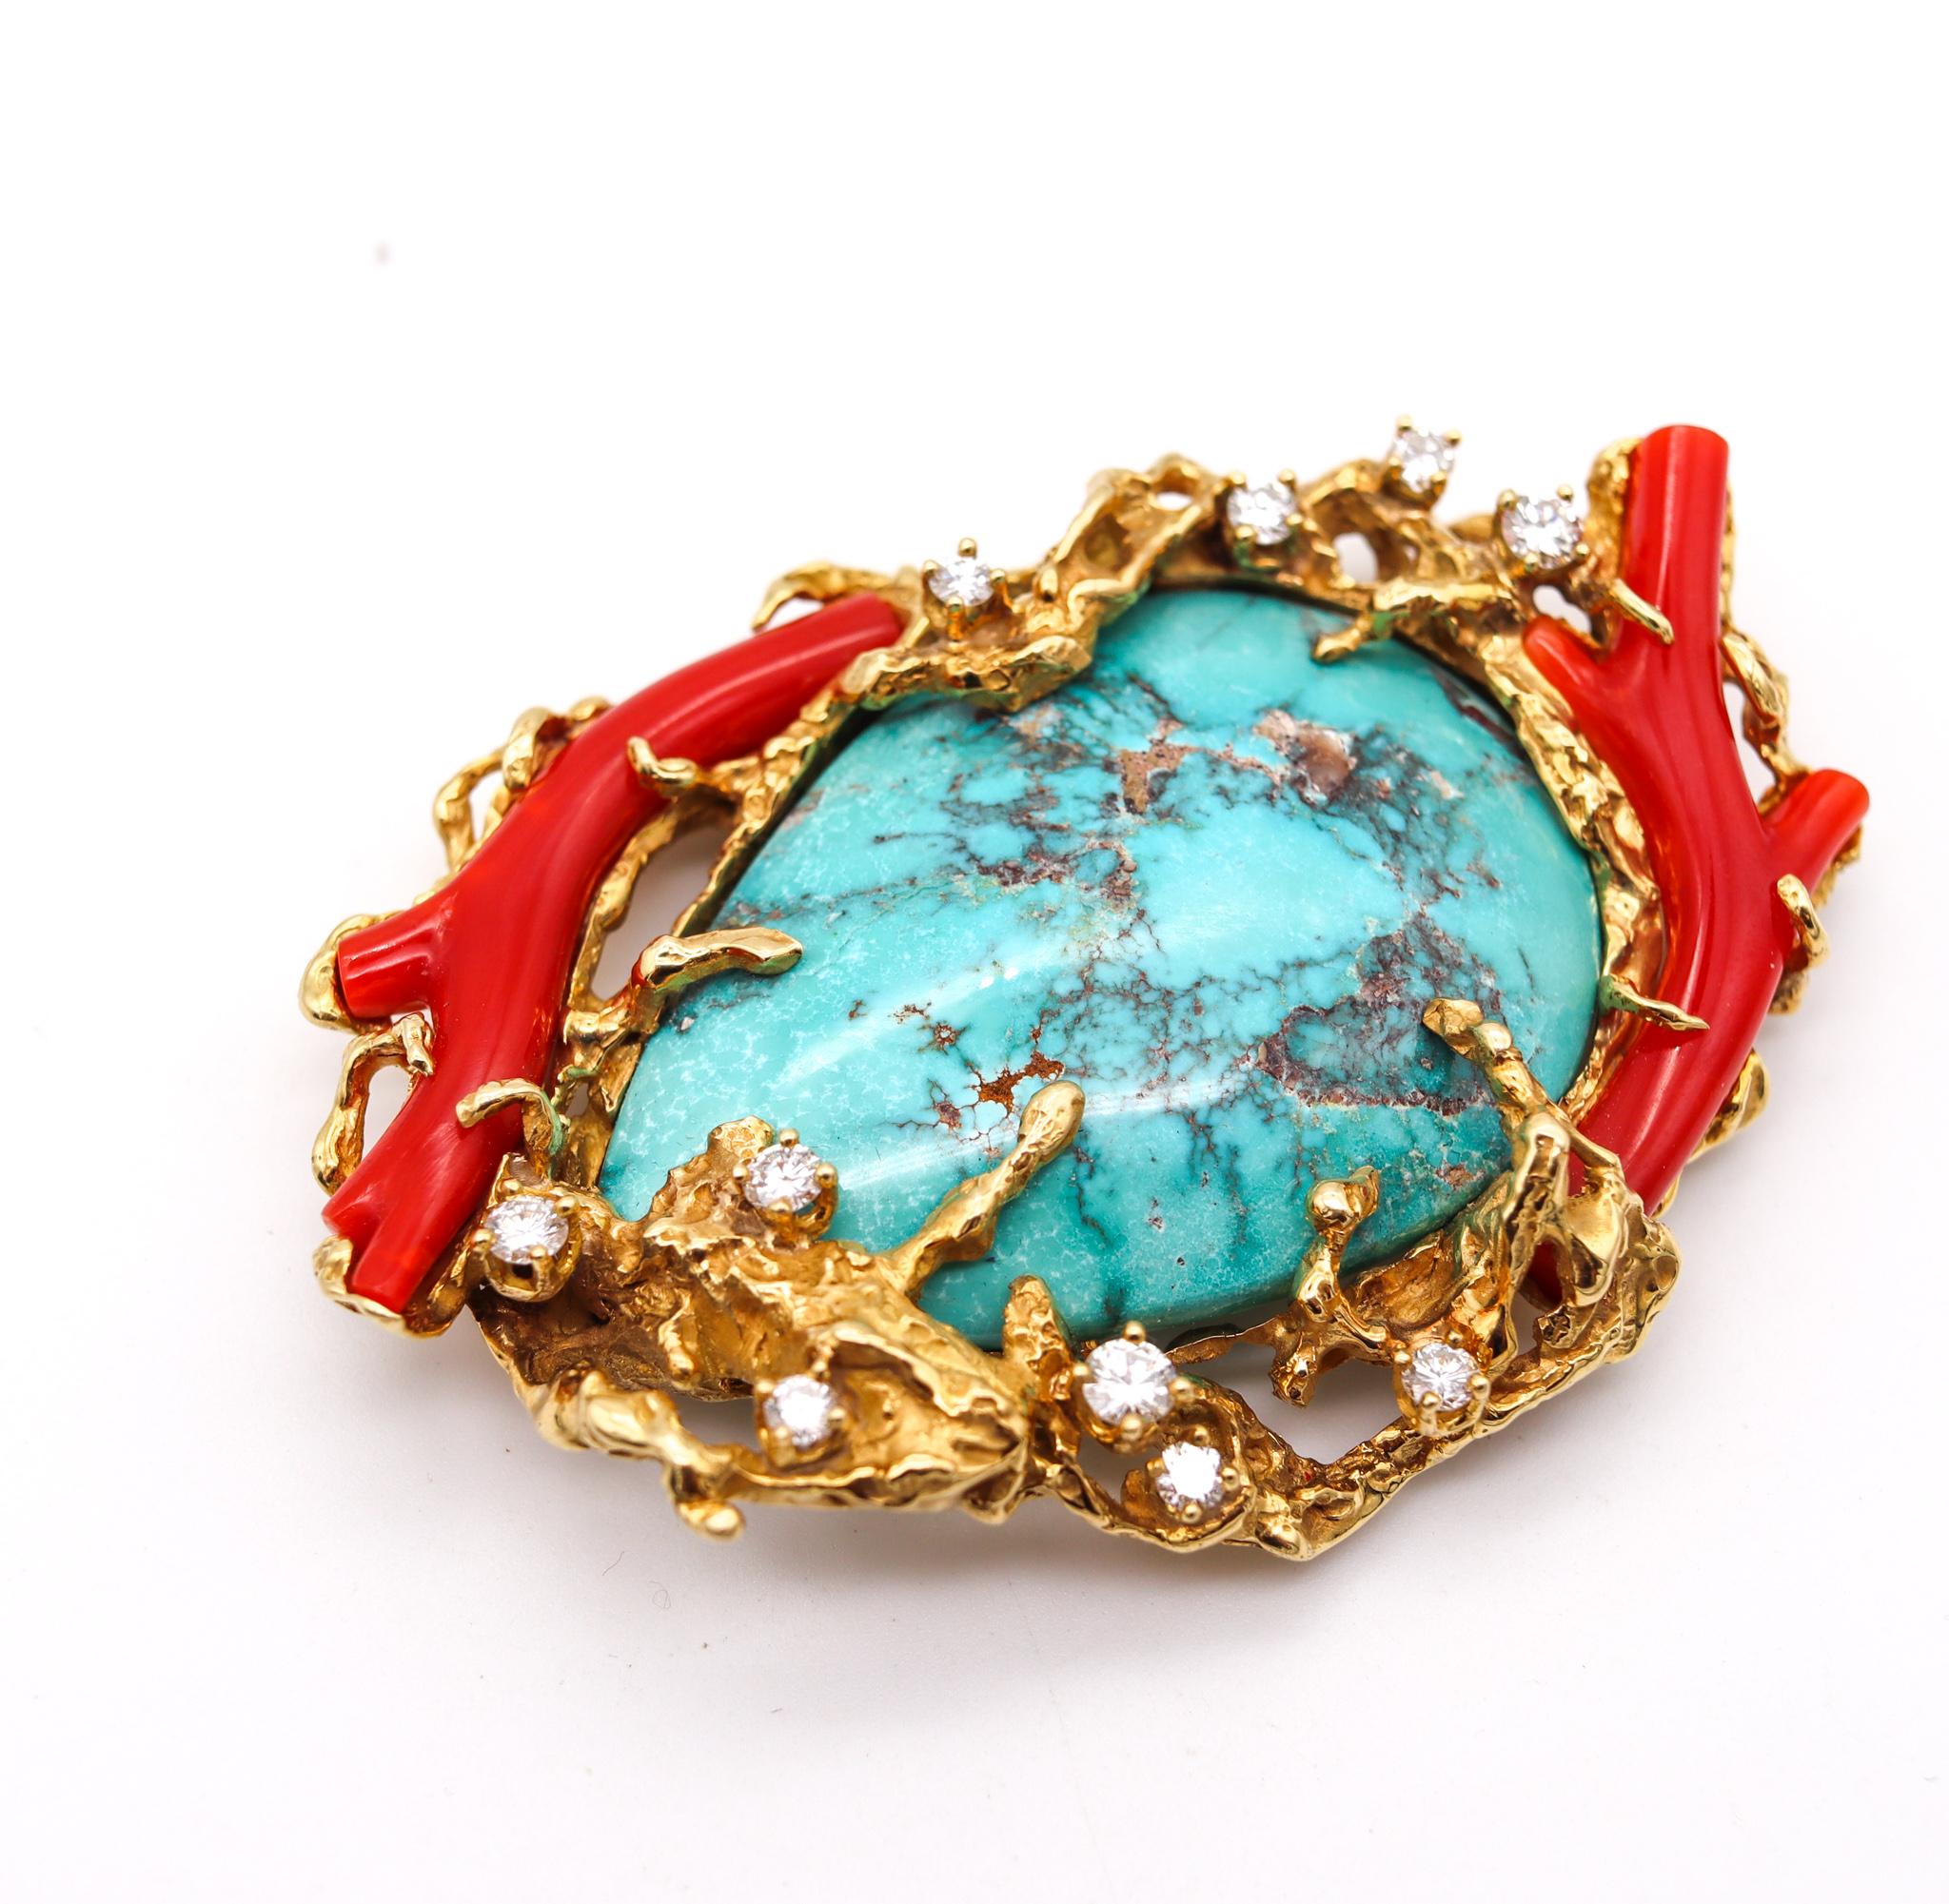 Modernist Arthur King 1960 Organic Piece 18Kt Gold with 106.41 Ct Diamonds Turquoise Coral For Sale